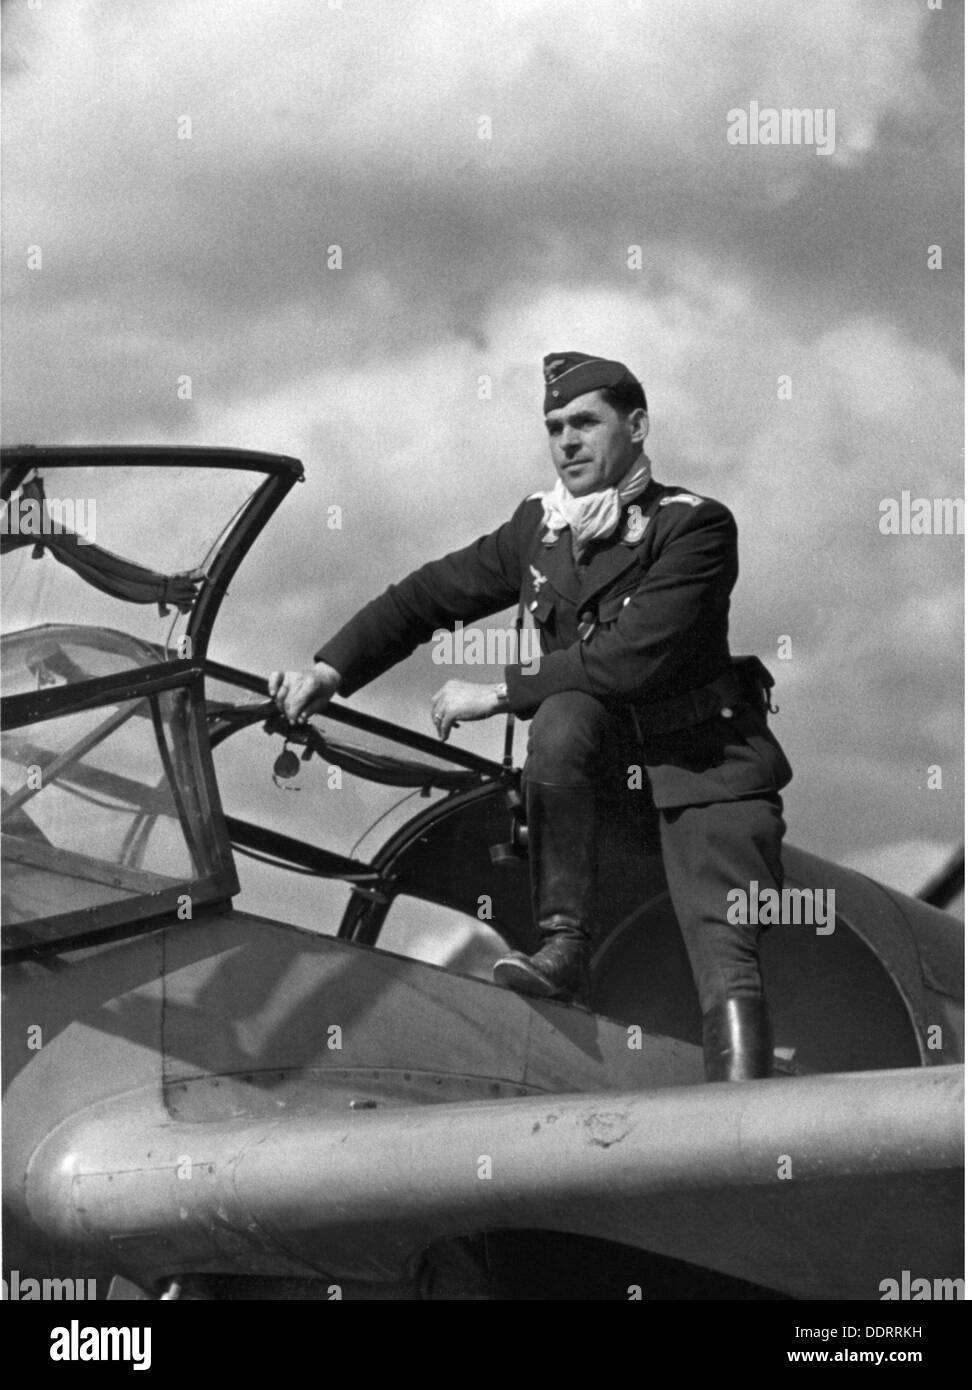 Second World War / WWII, propaganda, Germany, war correspondent of the Luftwaffe (German Air Force) Georg Schödl, 3rd Air Force War Correspondent Company, on an airplane, 1942, Additional-Rights-Clearences-Not Available Stock Photo